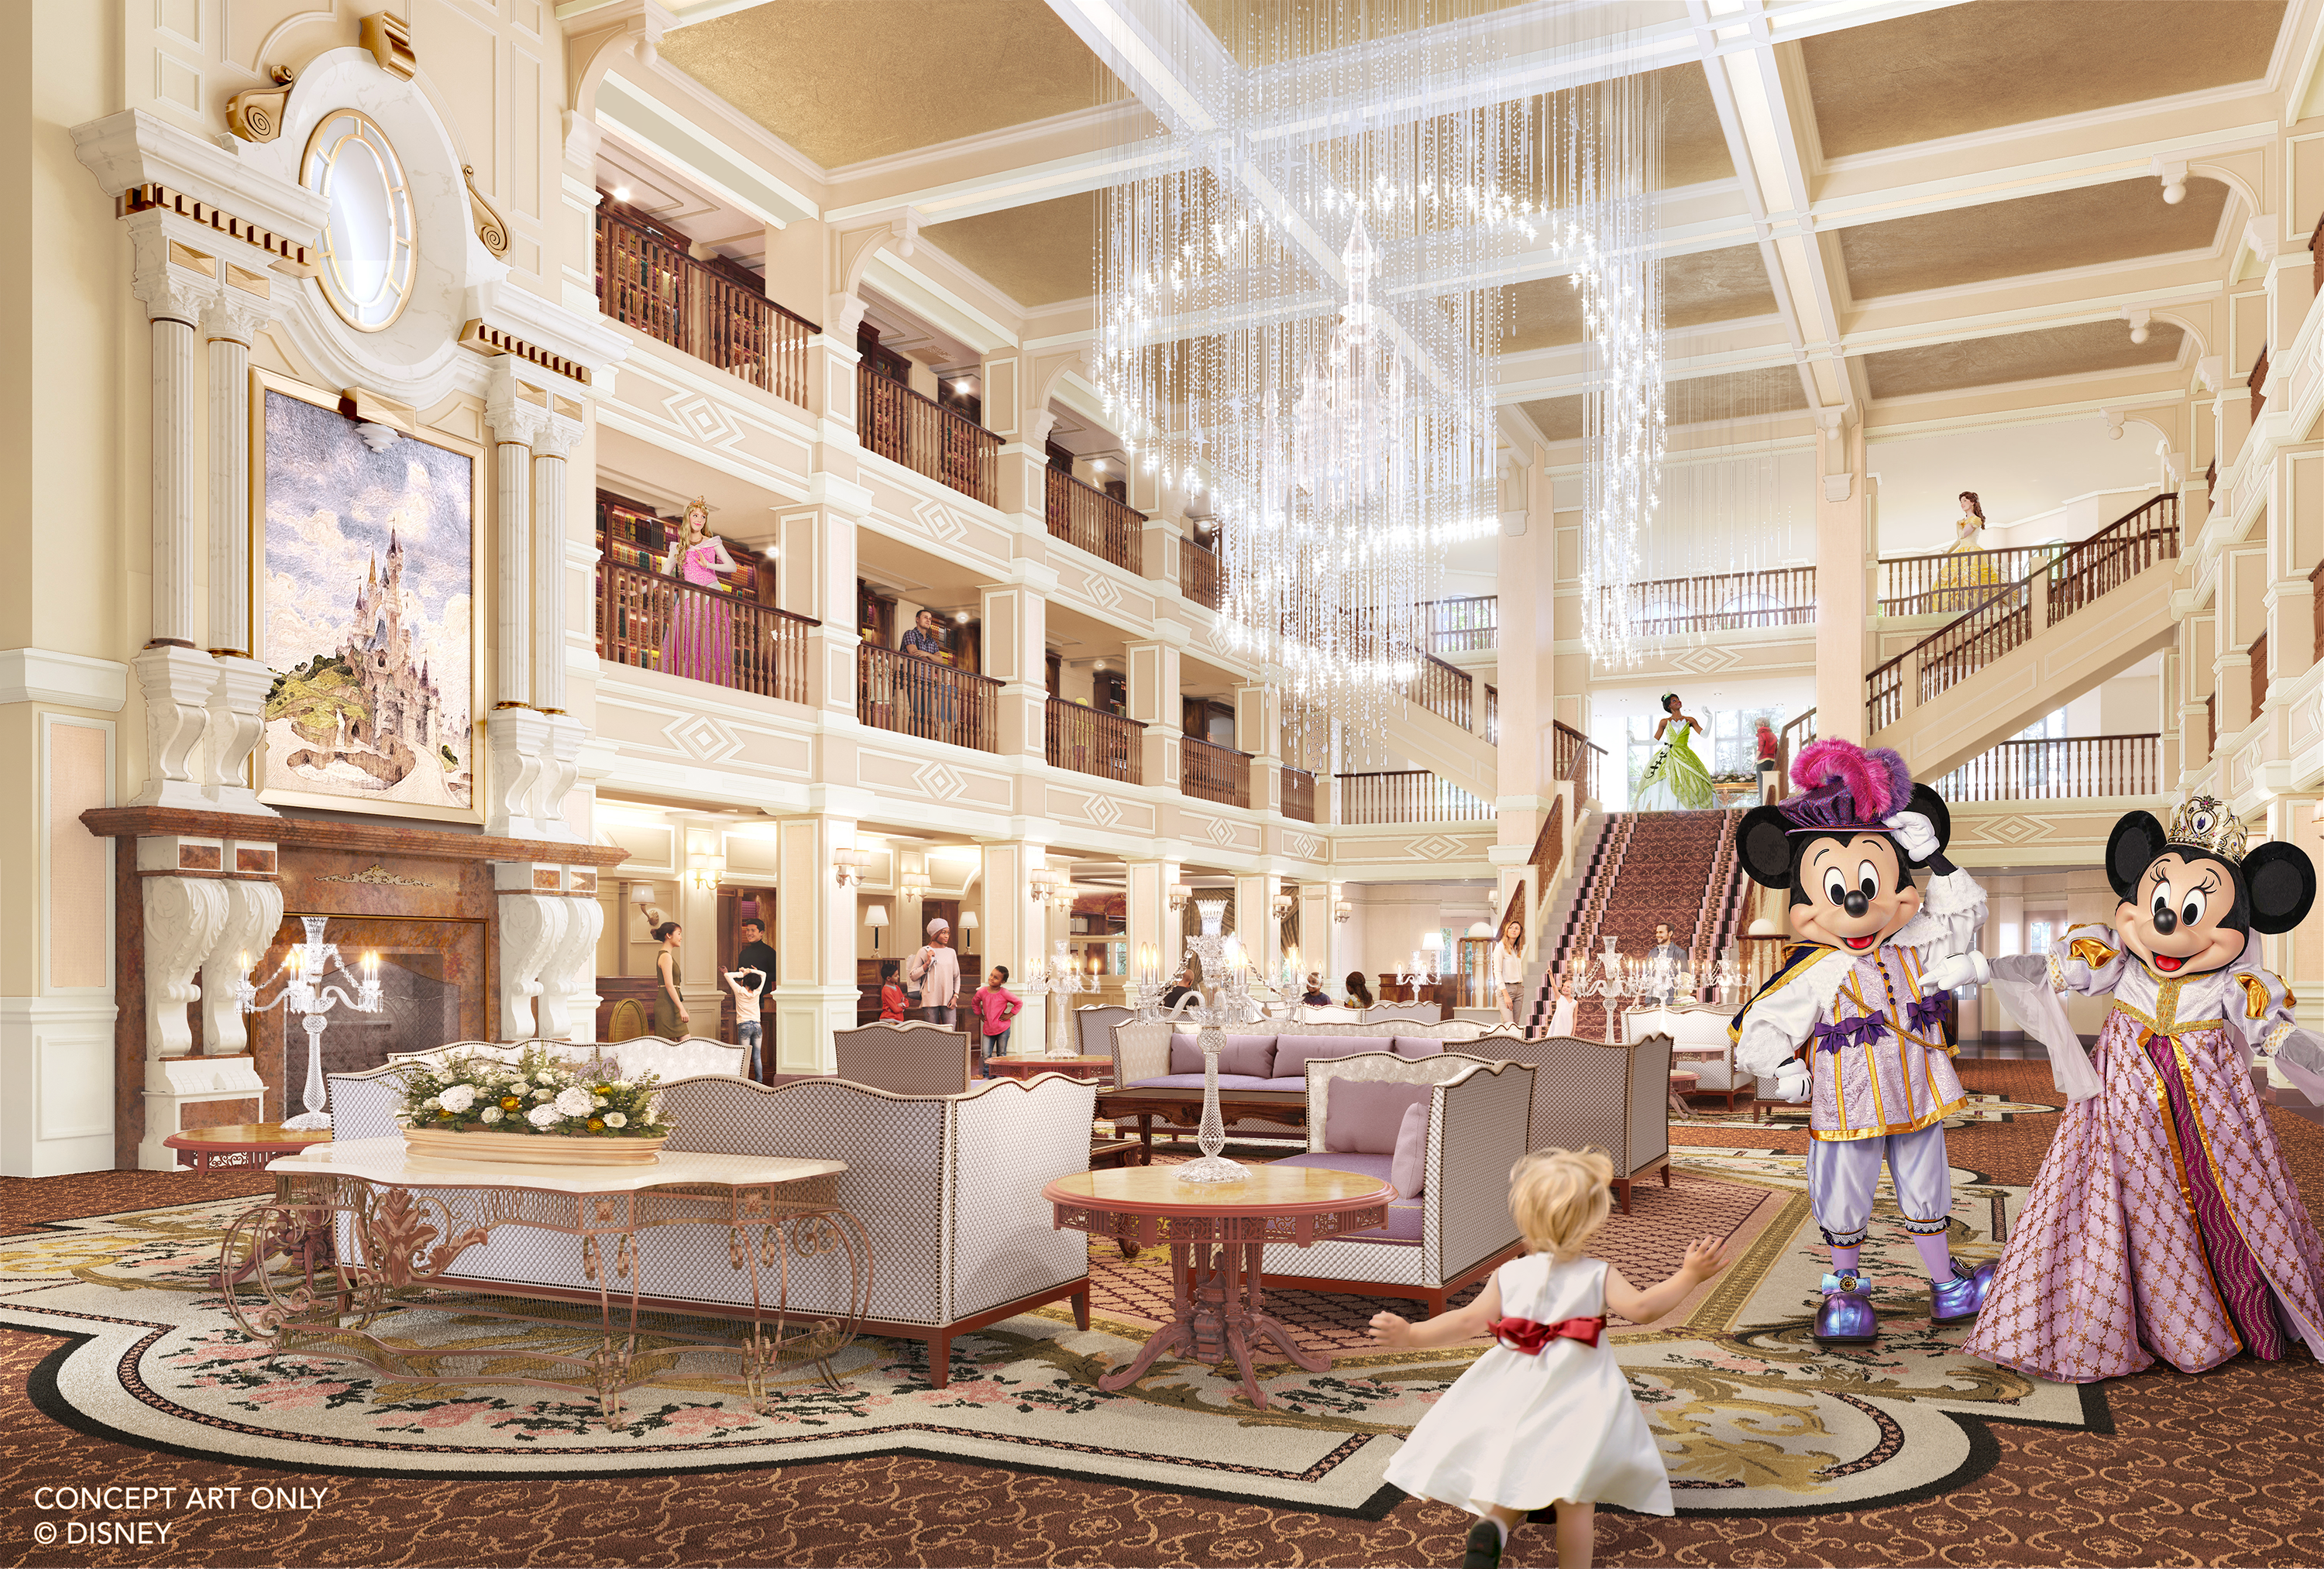 Disney characters like Mickey and Minnie will be present throughout the hotel